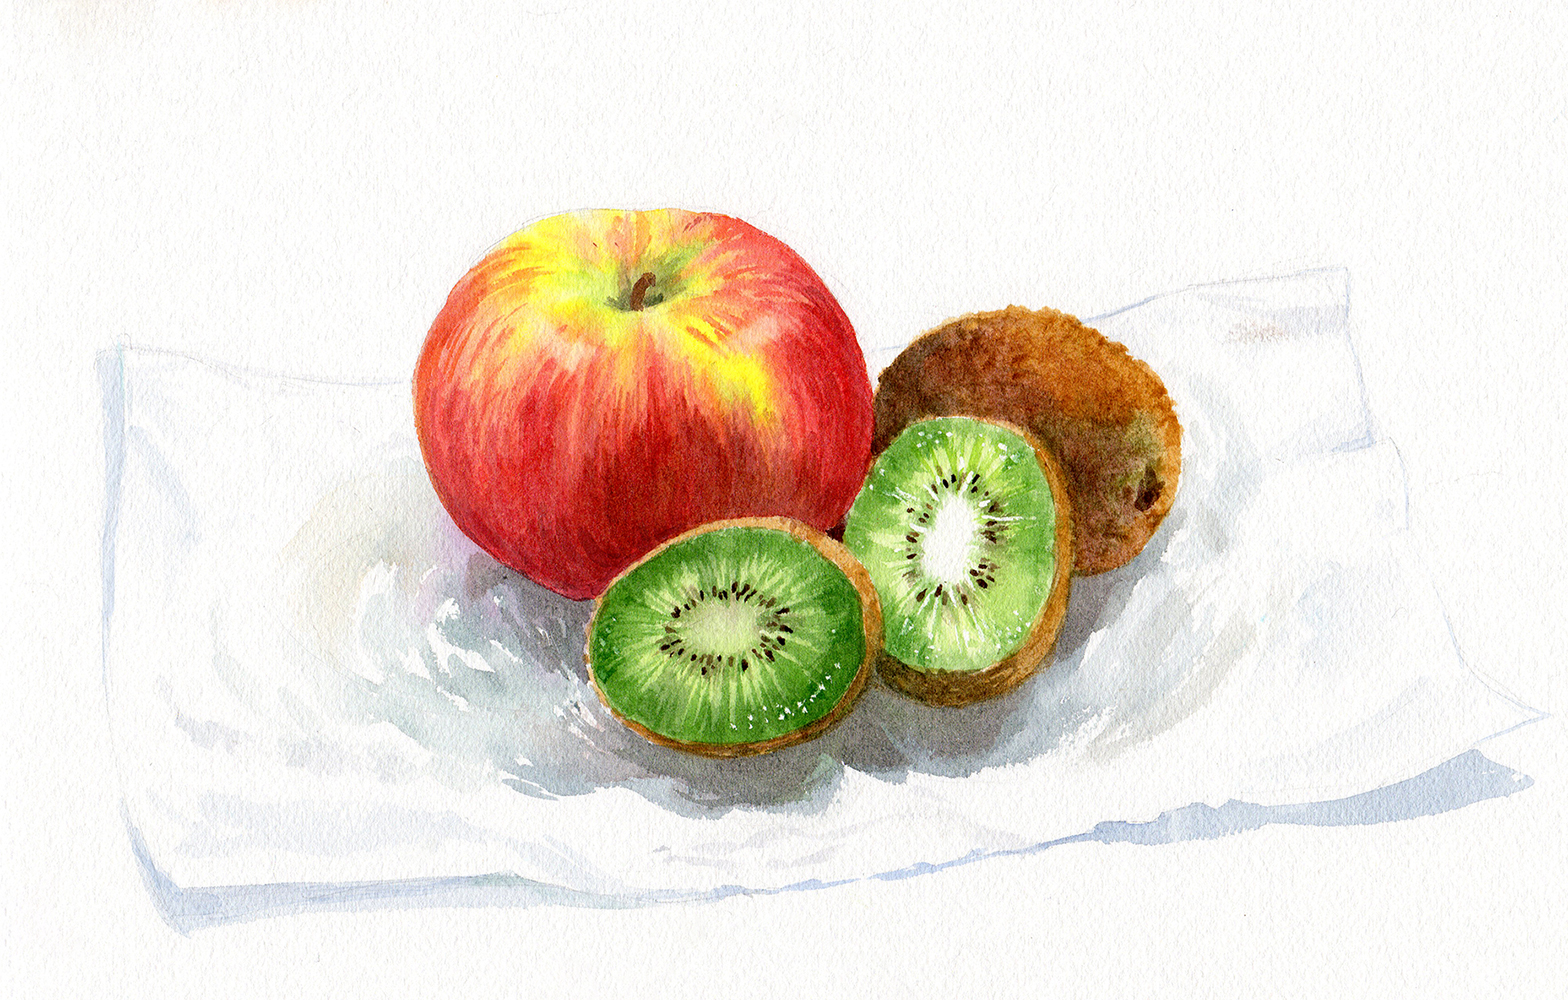 Sketching & Painting A Still Life Composition From Start To Finish